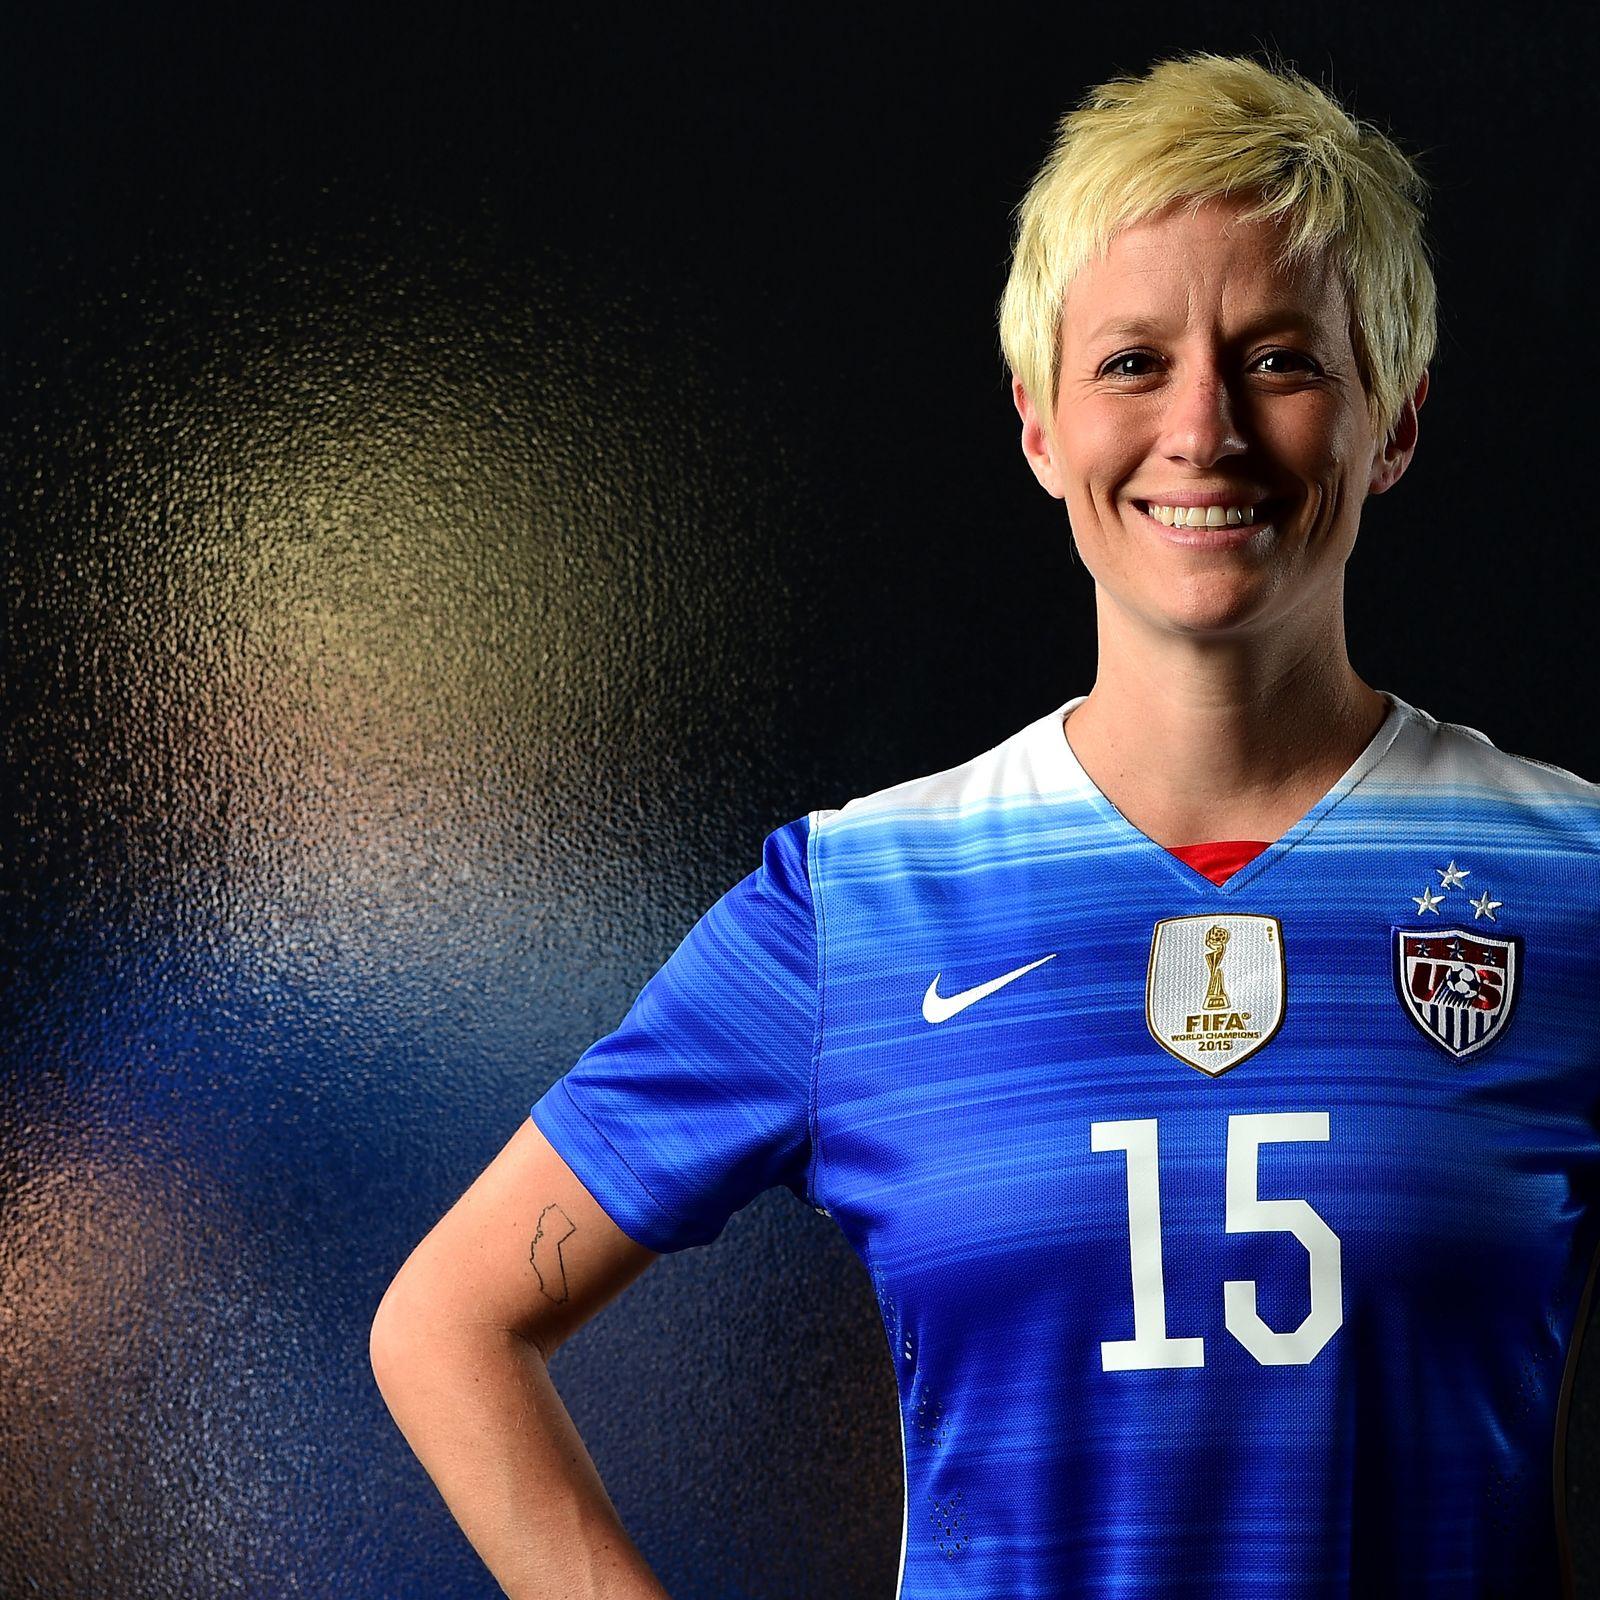 Facts About Olympic Star Megan Rapinoe You Probably Didn't Know